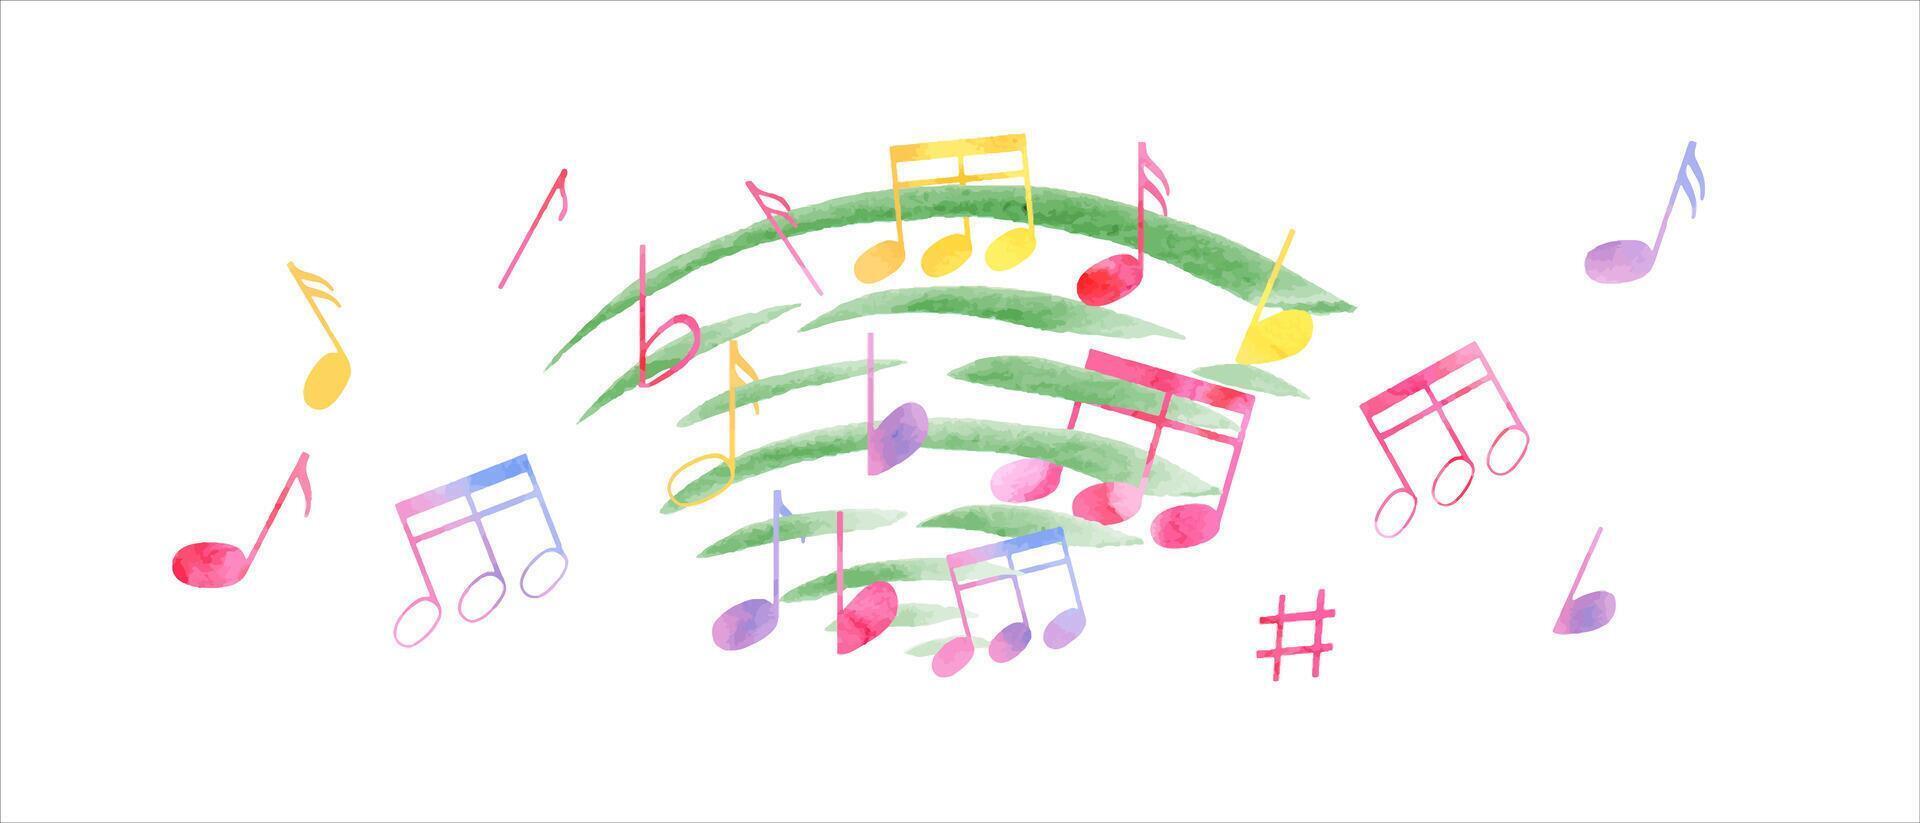 Composition with multicolored music notes. Notes flying through the waves of music. Rainbow color of note symbols. Watercolor illustration in classic style. Clip art for postcard design. vector